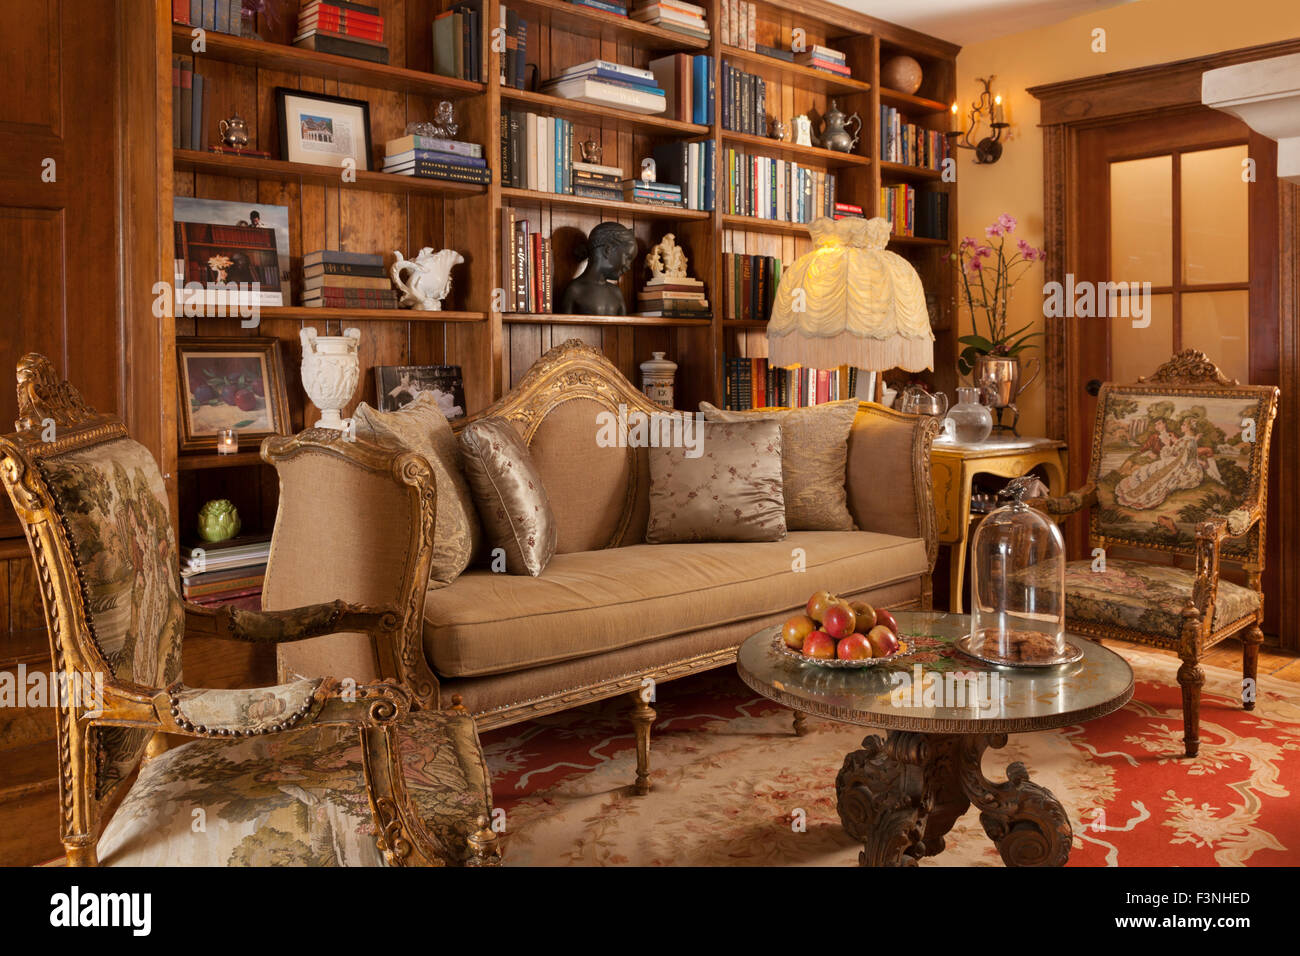 Home Interior design Living Room with Library and Bookshelves Stock Photo